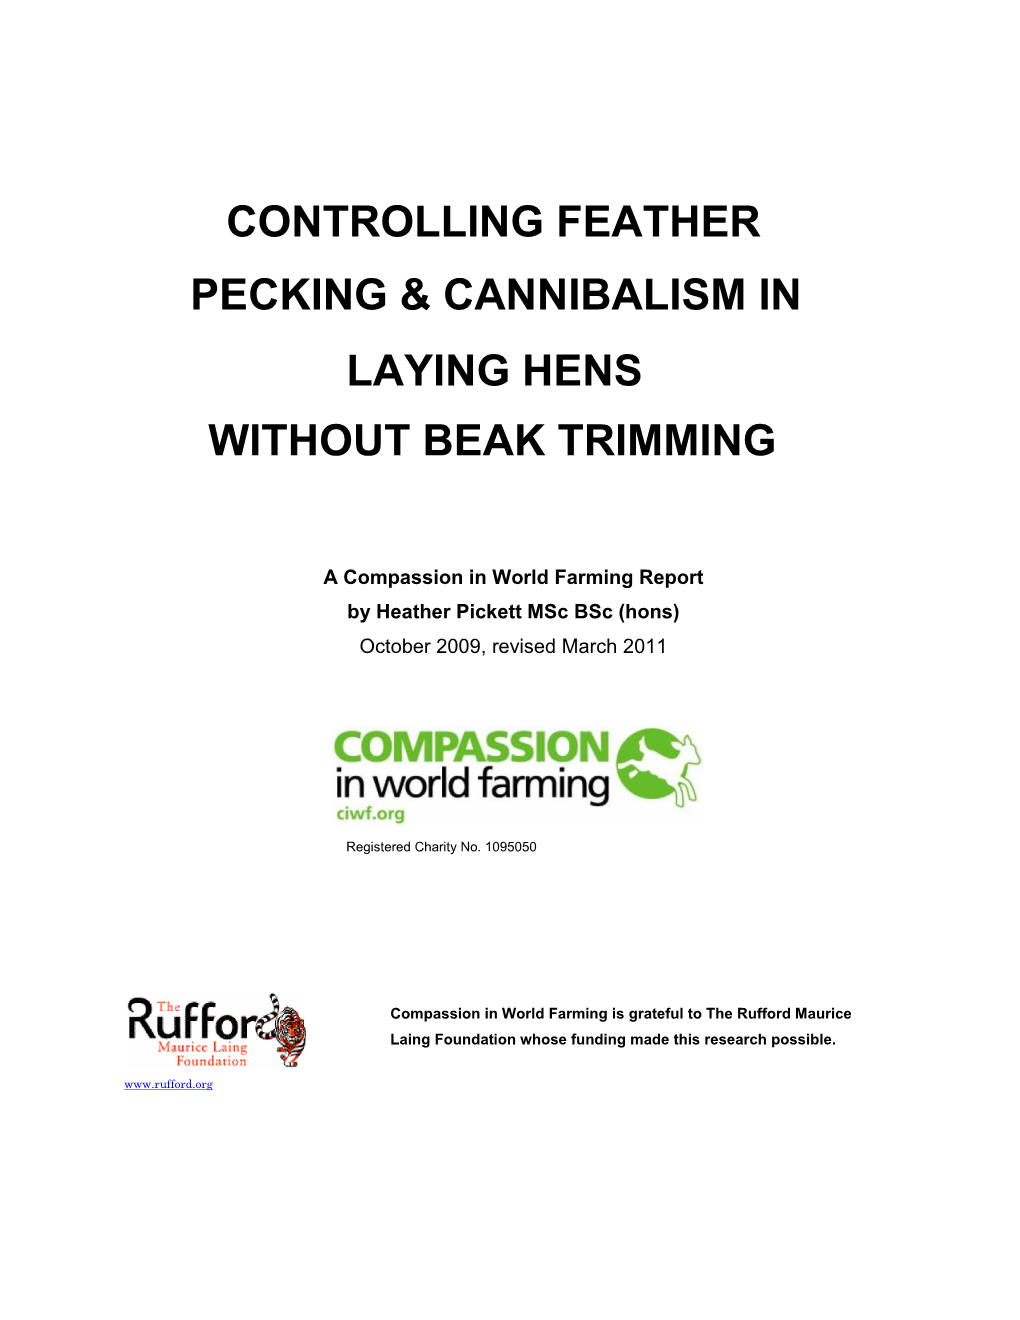 Controlling Feather Pecking and Cannibalism in Laying Hens Without